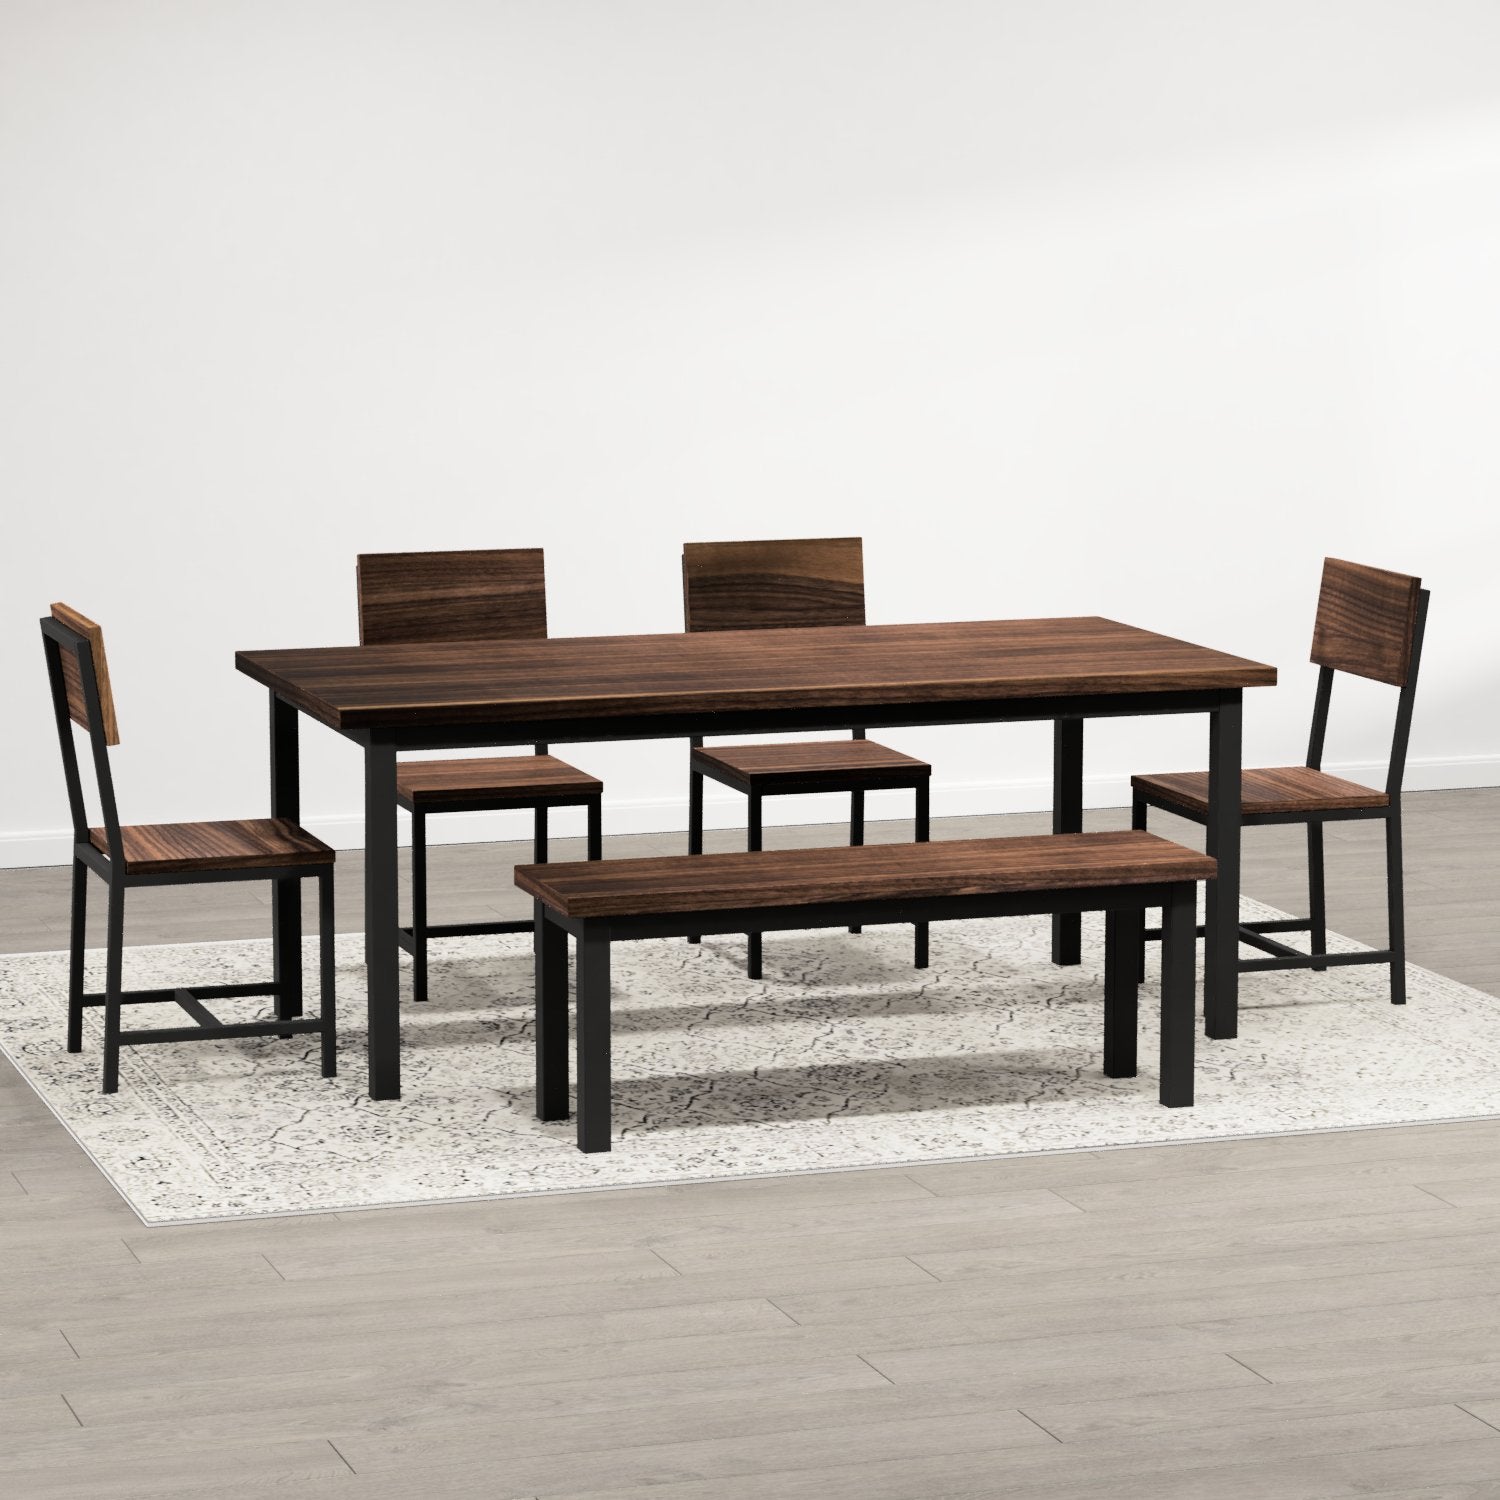 The Frontier Dining Table - FargoWoodworks